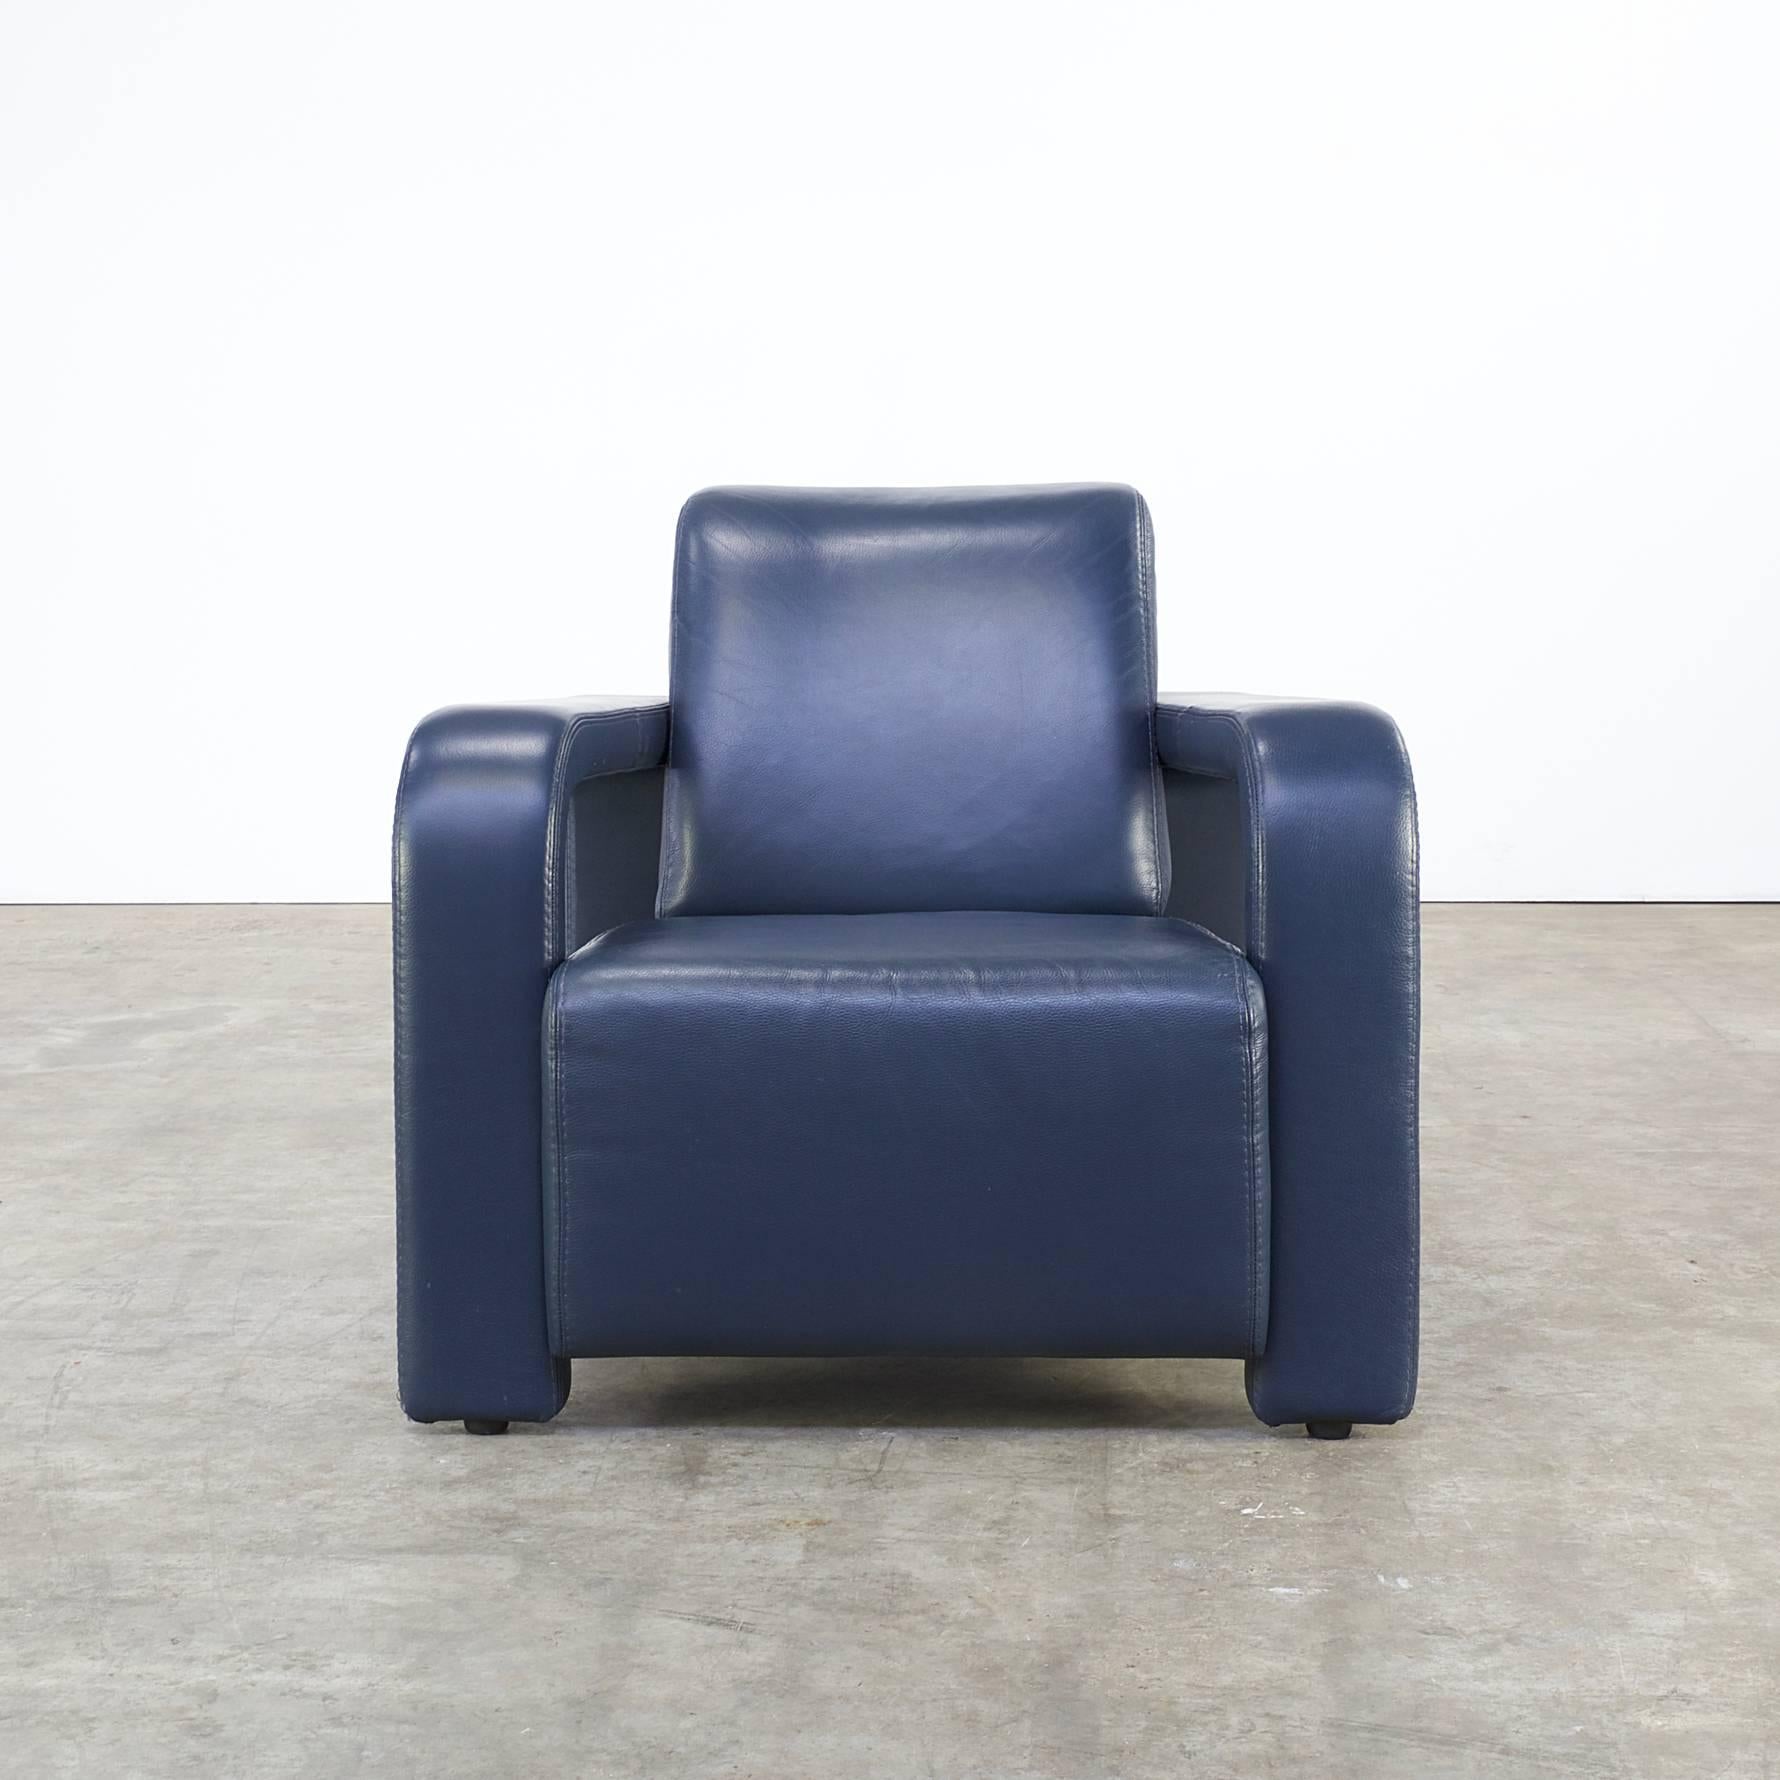 1980s lounge chair for Marinelli Italy. Blue skai/leatherette in good condition. Wear consistant with age and use. Very comfortable and high quality lounge chair. Dimensions: 86 cm (W) x 90cm (D) x 79cm (H), seat H 39cm.